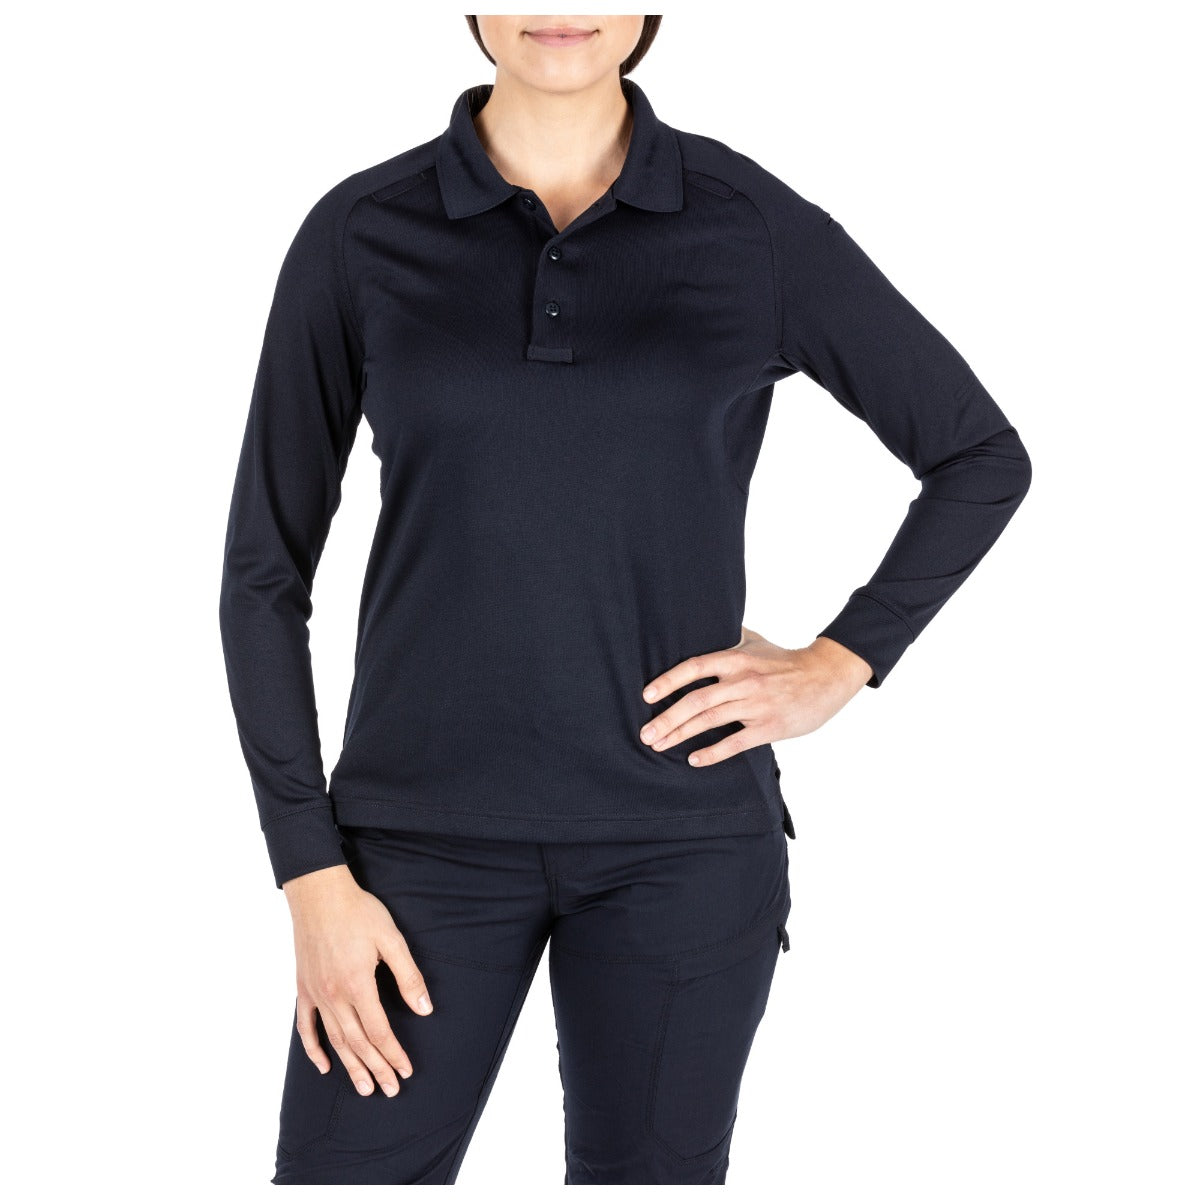 5.11 Tactical Women's Performance Long Sleeve Polo (62408) | The Fire Center | Fuego Fire Center | FIREFIGHTER GEAR | We call it the Women's Performance Polo, but honestly, that's an understatement. Made from jersey-knit 100% polyester fabric, this ultra-durable polo is wrinkle, shrink, and snag-resistant. The Performance Polo's stylish cut and stay-flat, no-roll collar transitions easily from the office to the range. 